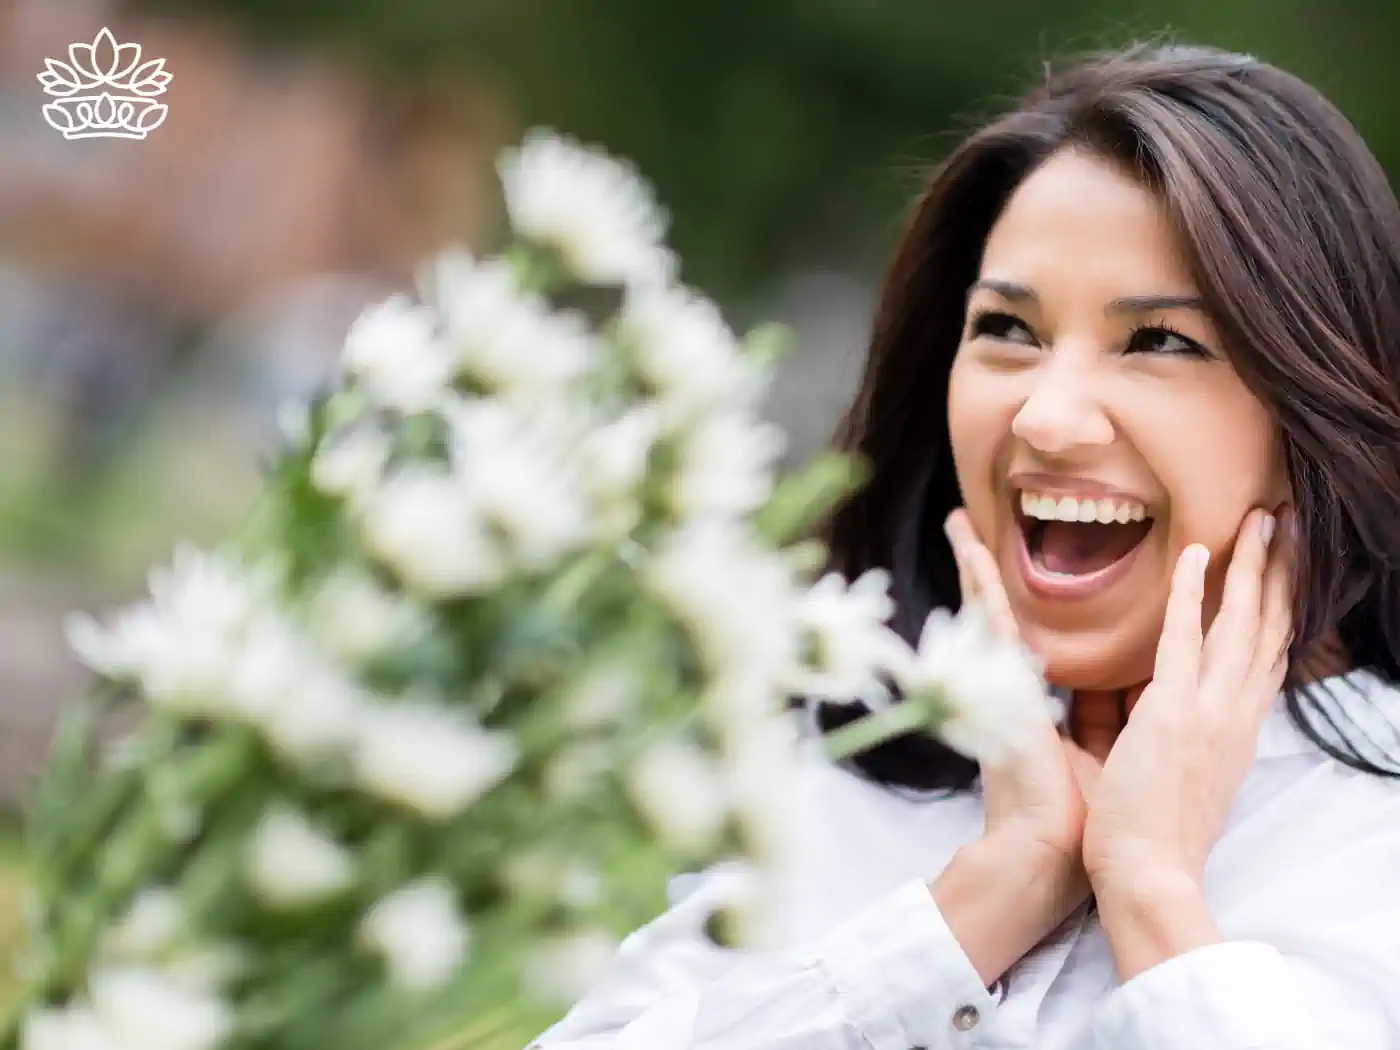 Woman with a delighted expression receiving a bouquet of white flowers in a park. Fabulous Flowers and Gifts, Luxury Flower Arrangements.